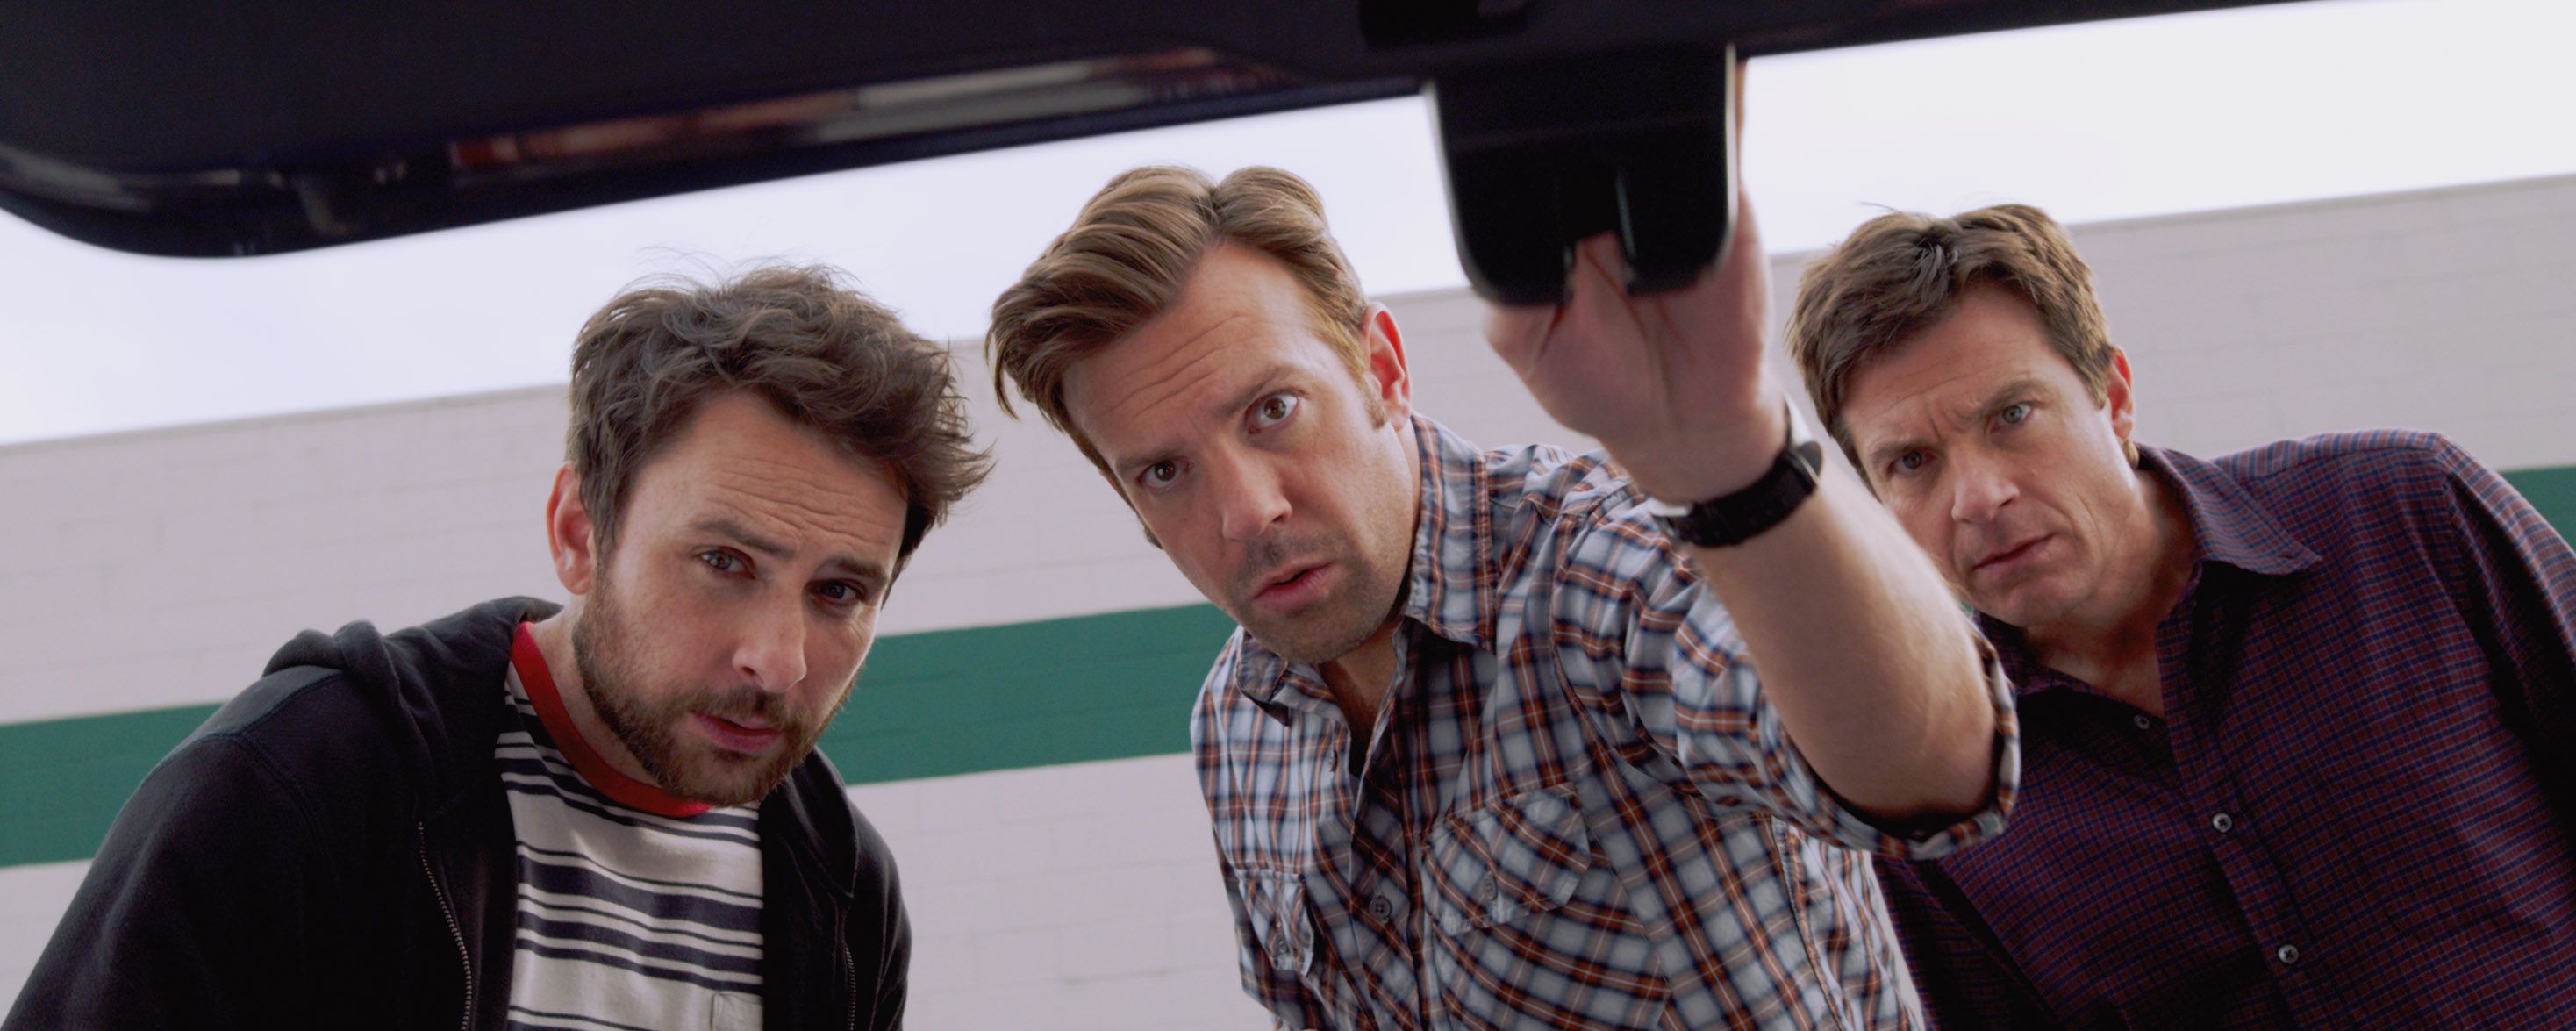 Looking into the trunk - Horrible Bosses 2